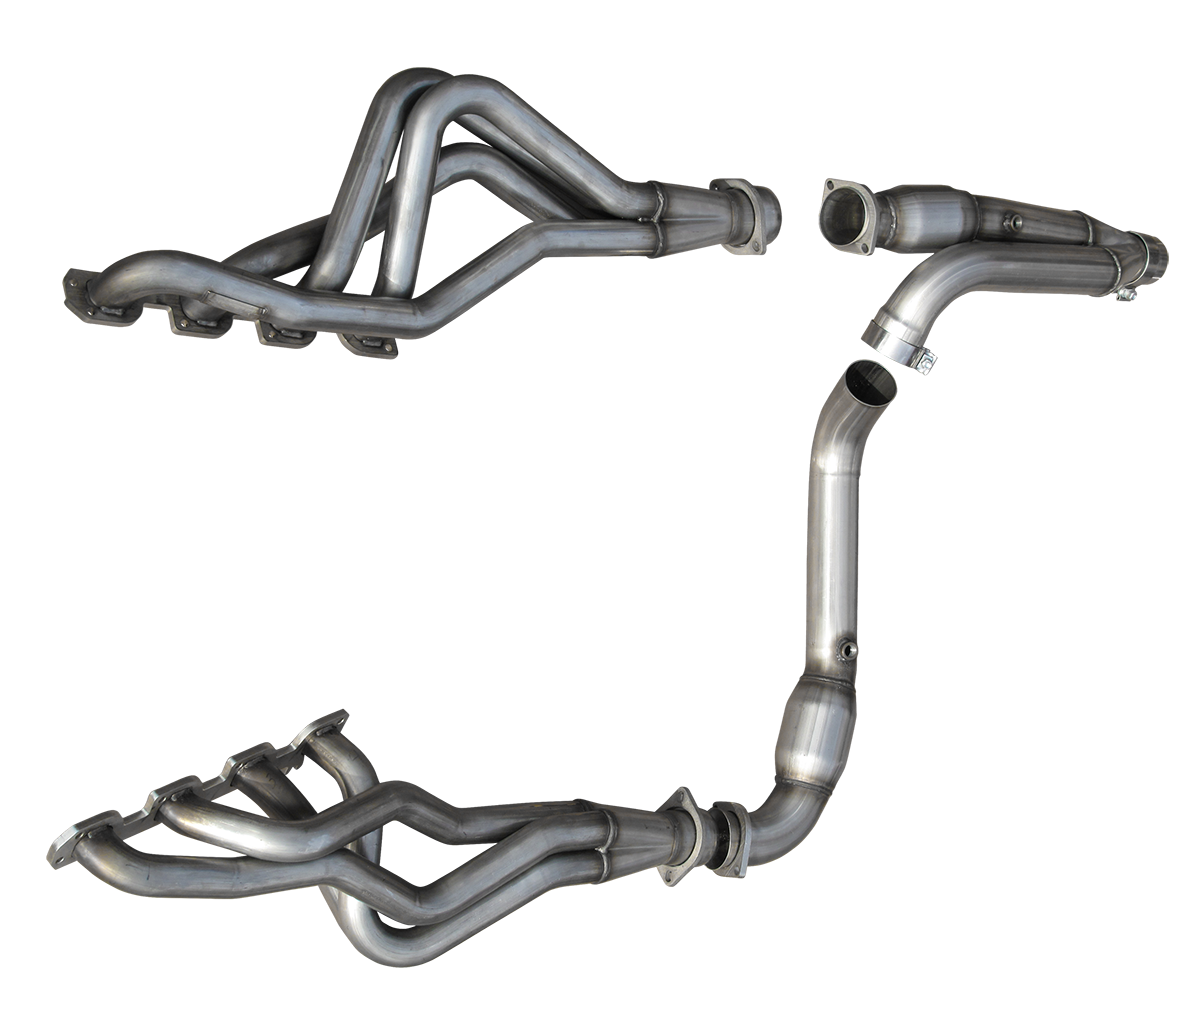 2013-2018 Dodge Ram 1500 American Racing Headers 1 3/4" x 3" Long Tube Headers w/3" Ypipe, Cats & Pure Thunder Exhaust System